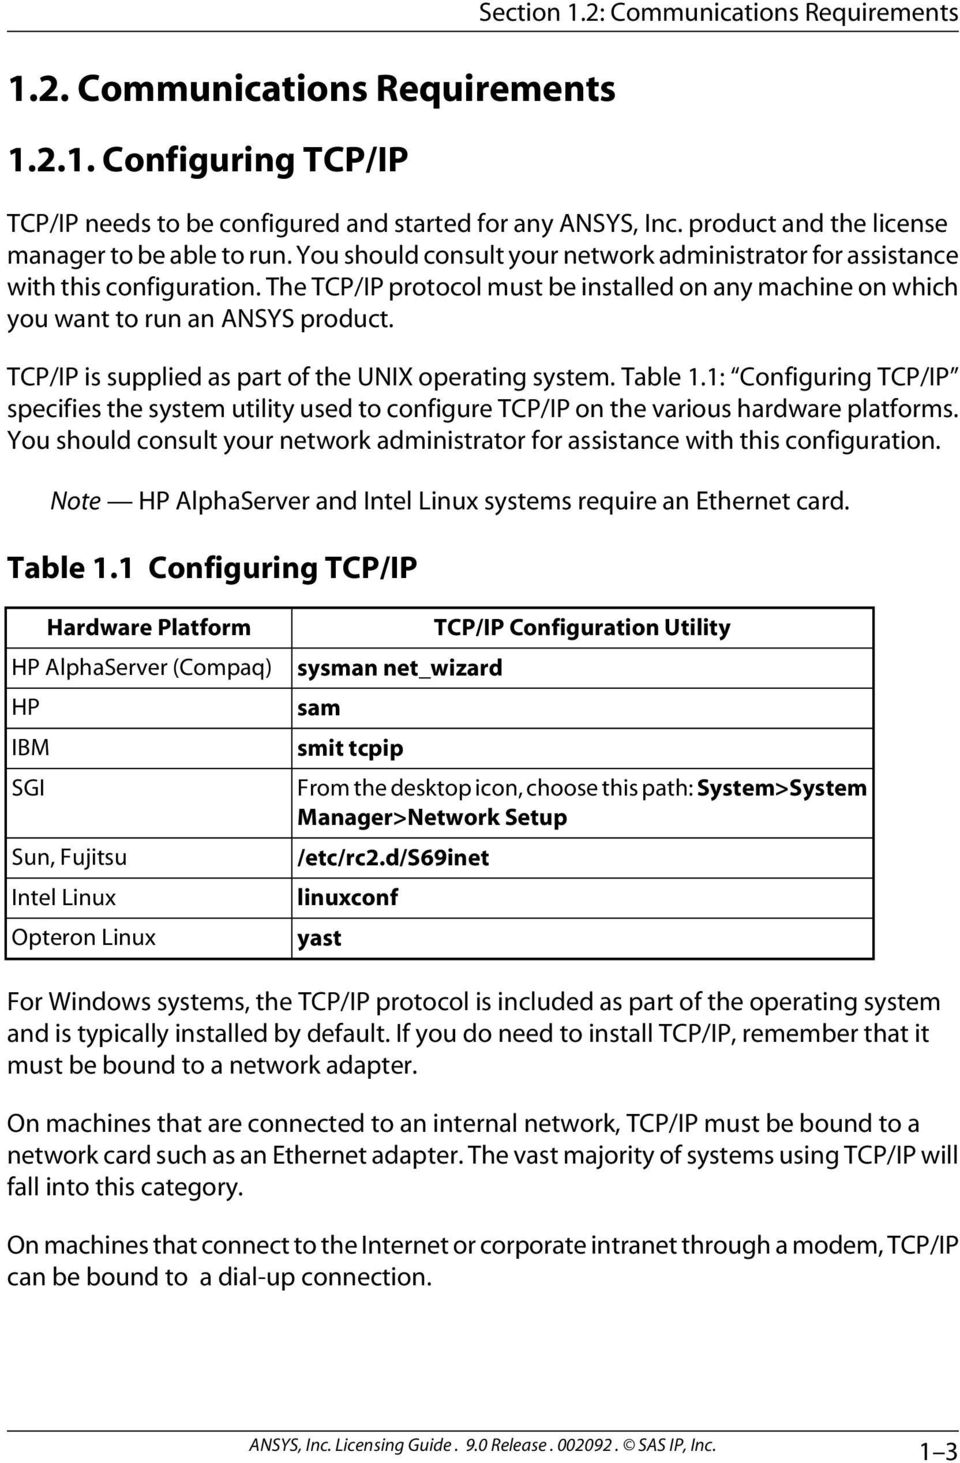 The TCP/IP Reference Model